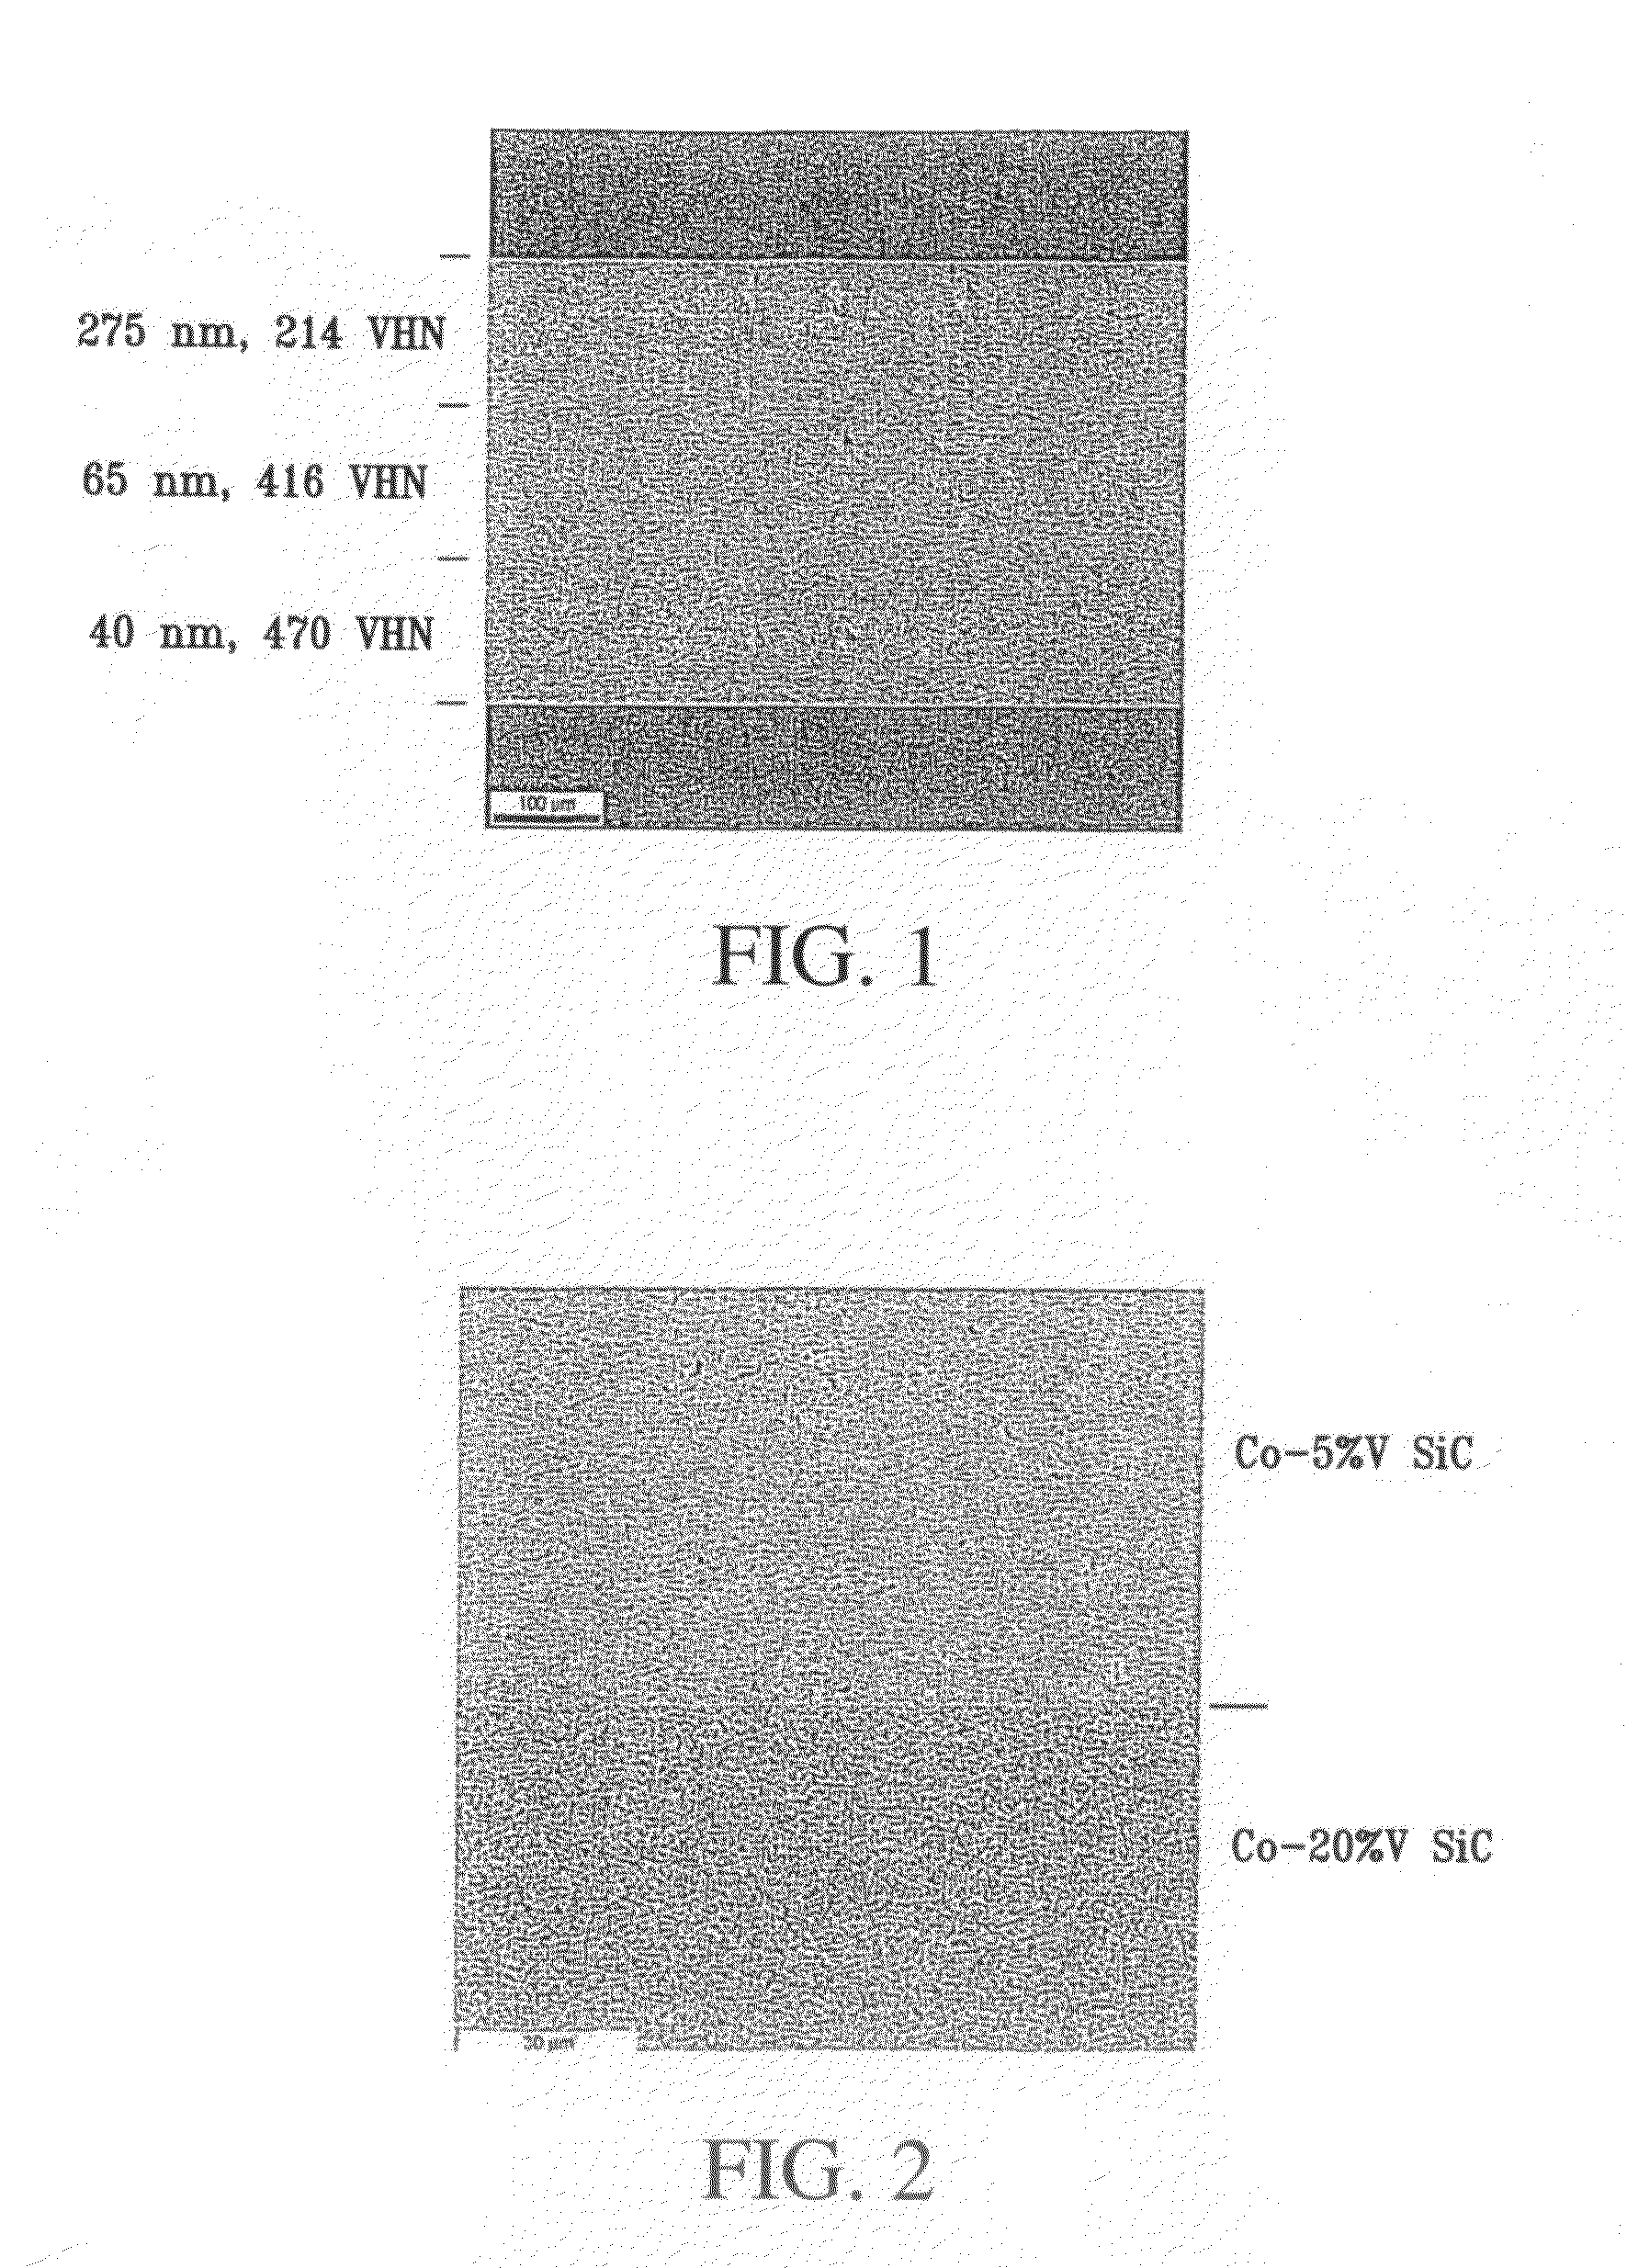 Variable property electrodepositing of metallic structures